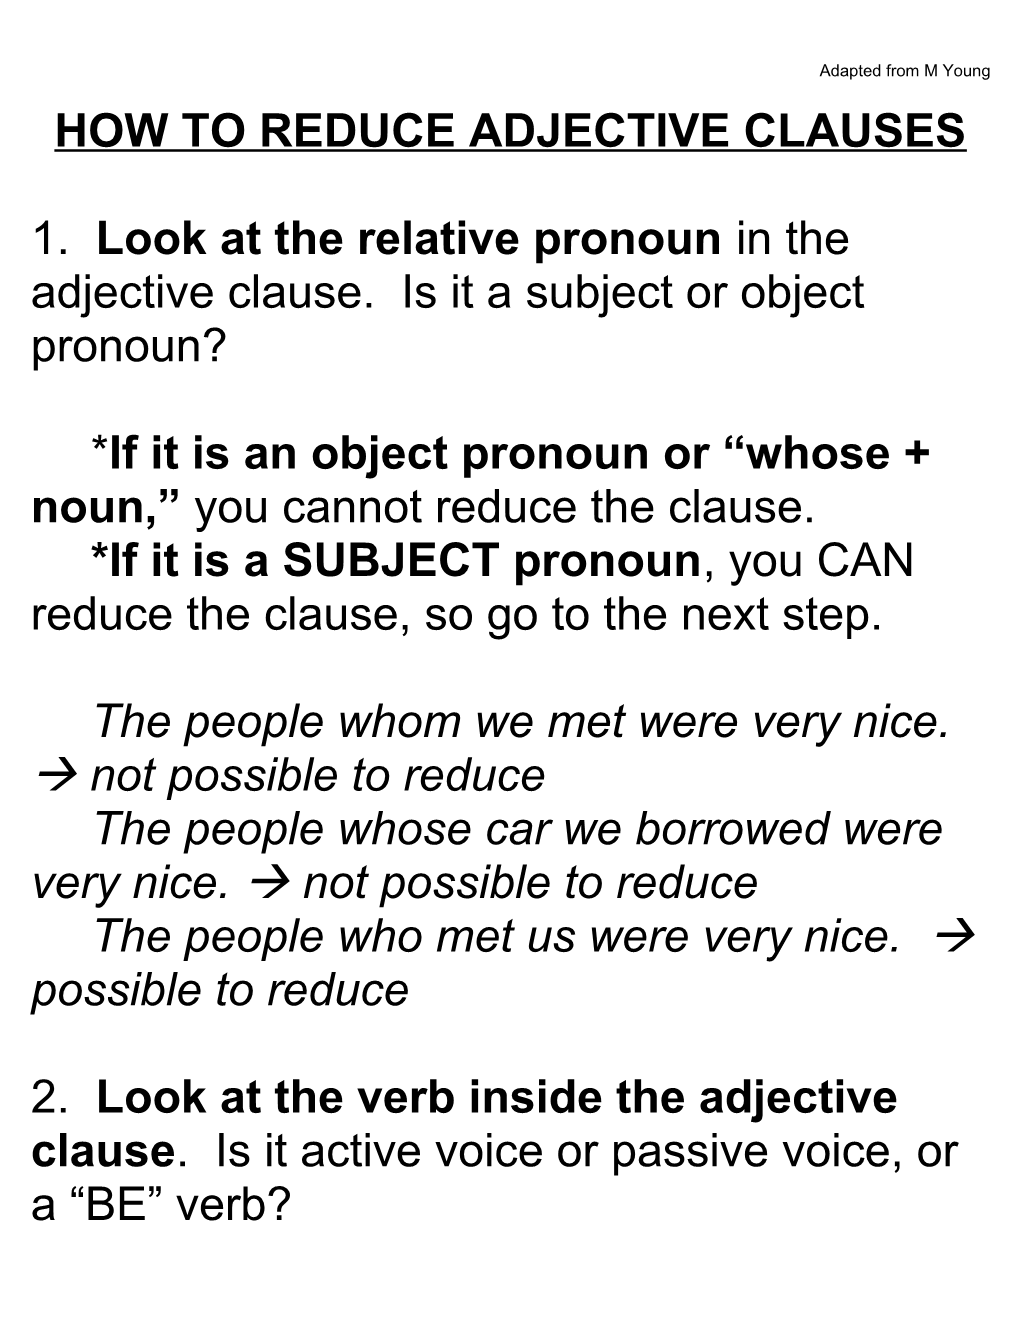 How to Reduce Adjective Clauses